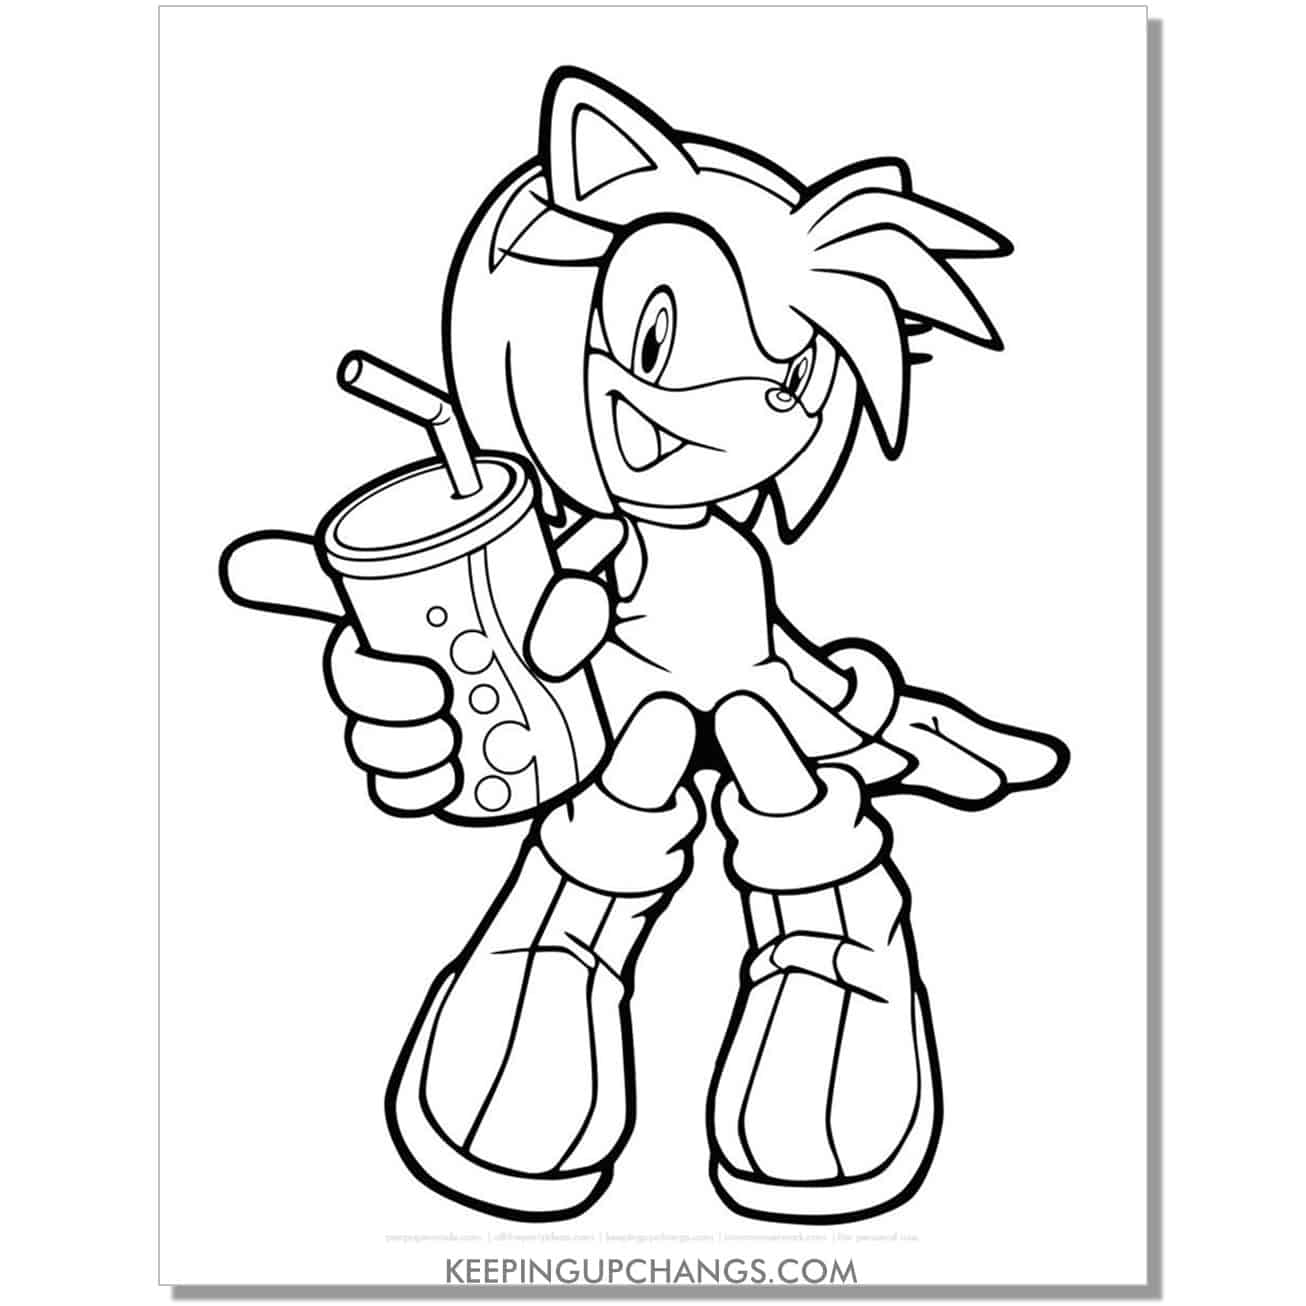 amy rose with drink in hand sonic coloring page.